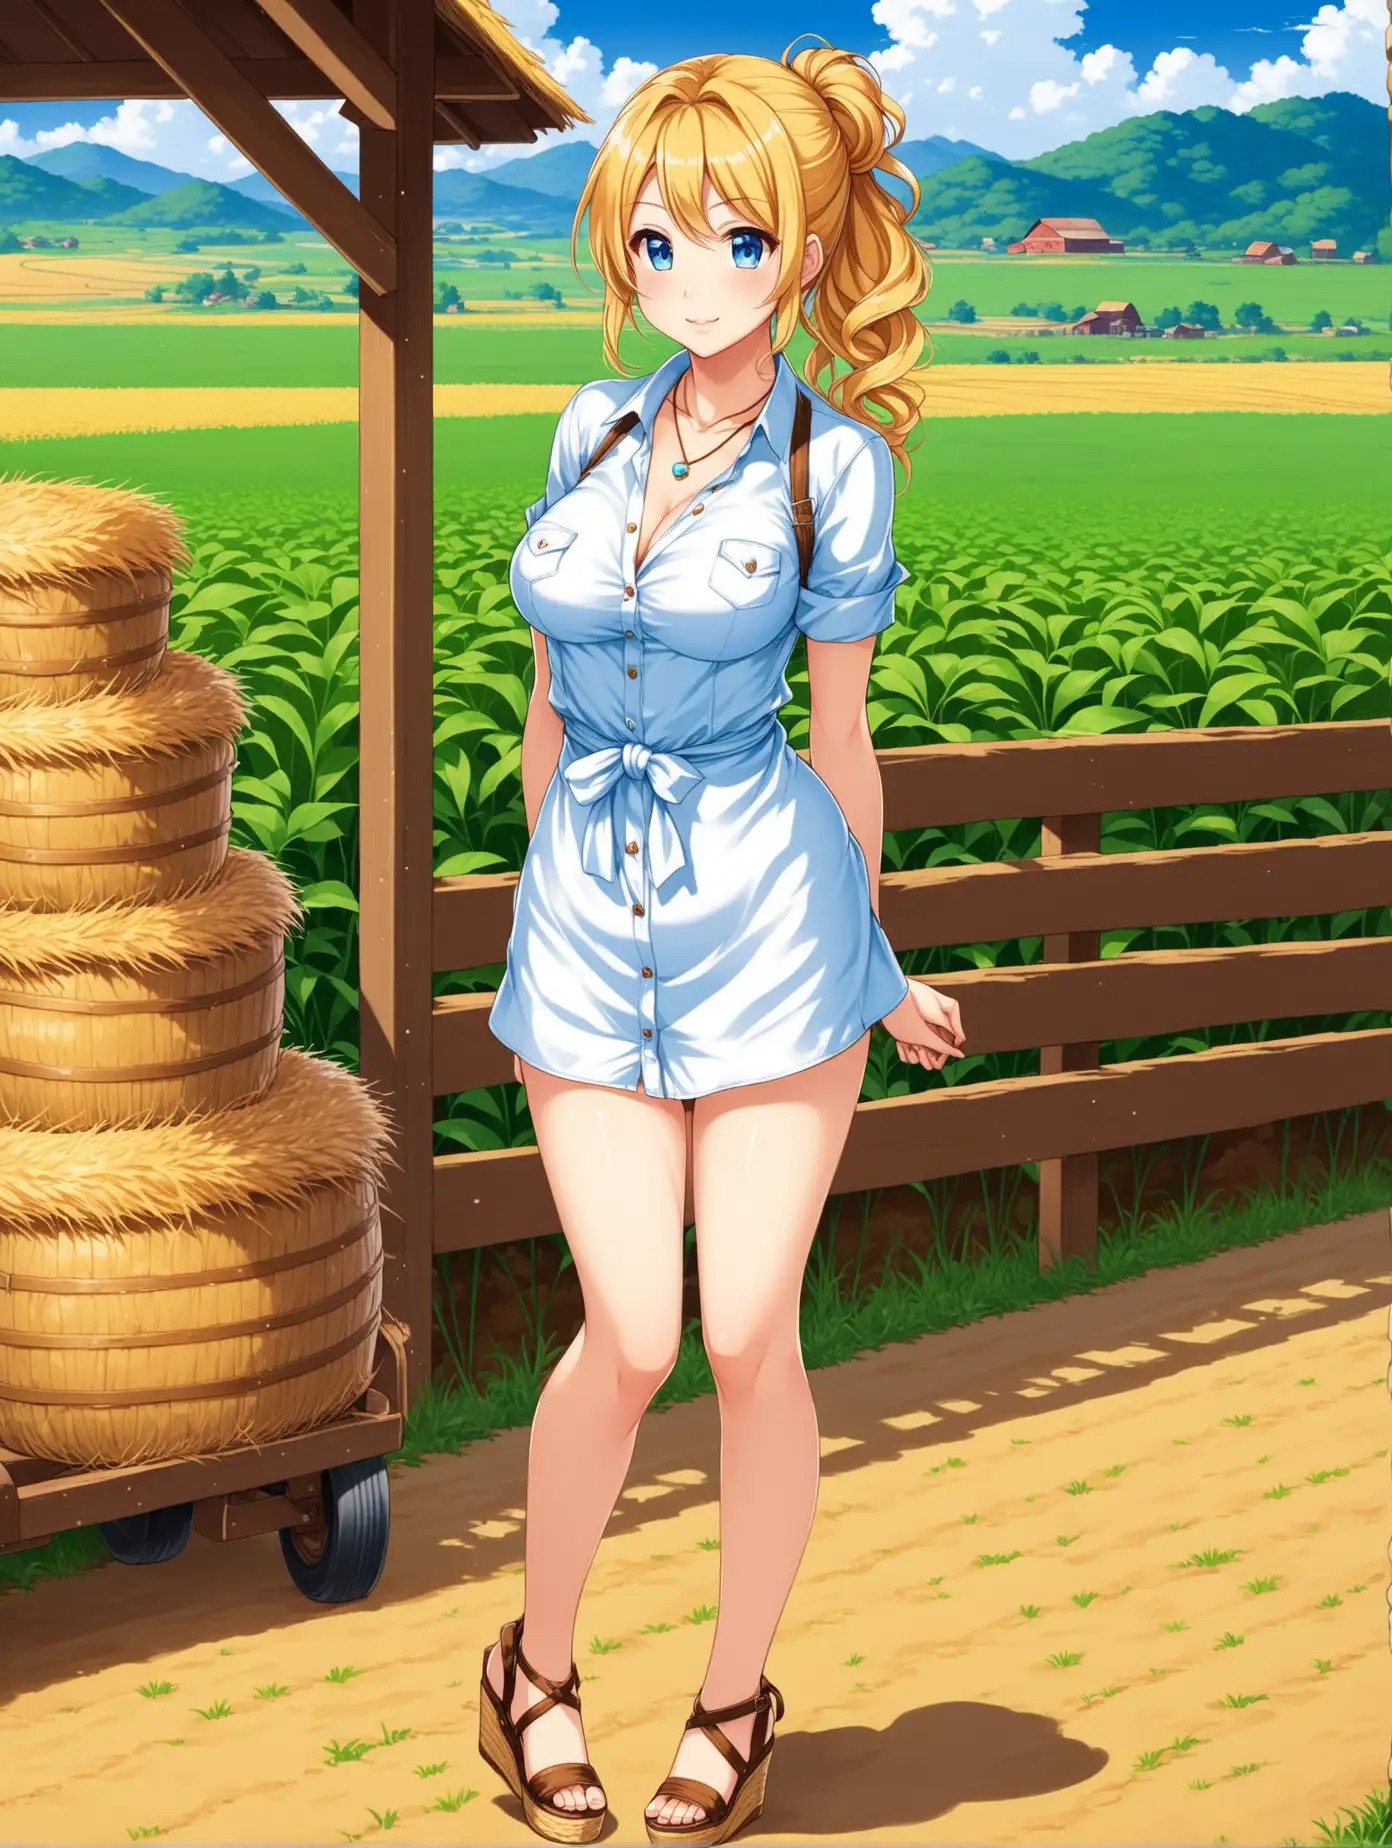 Sensual-Anime-Girl-Bust-Portrait-Blonde-Beauty-in-Farmer-Outfit